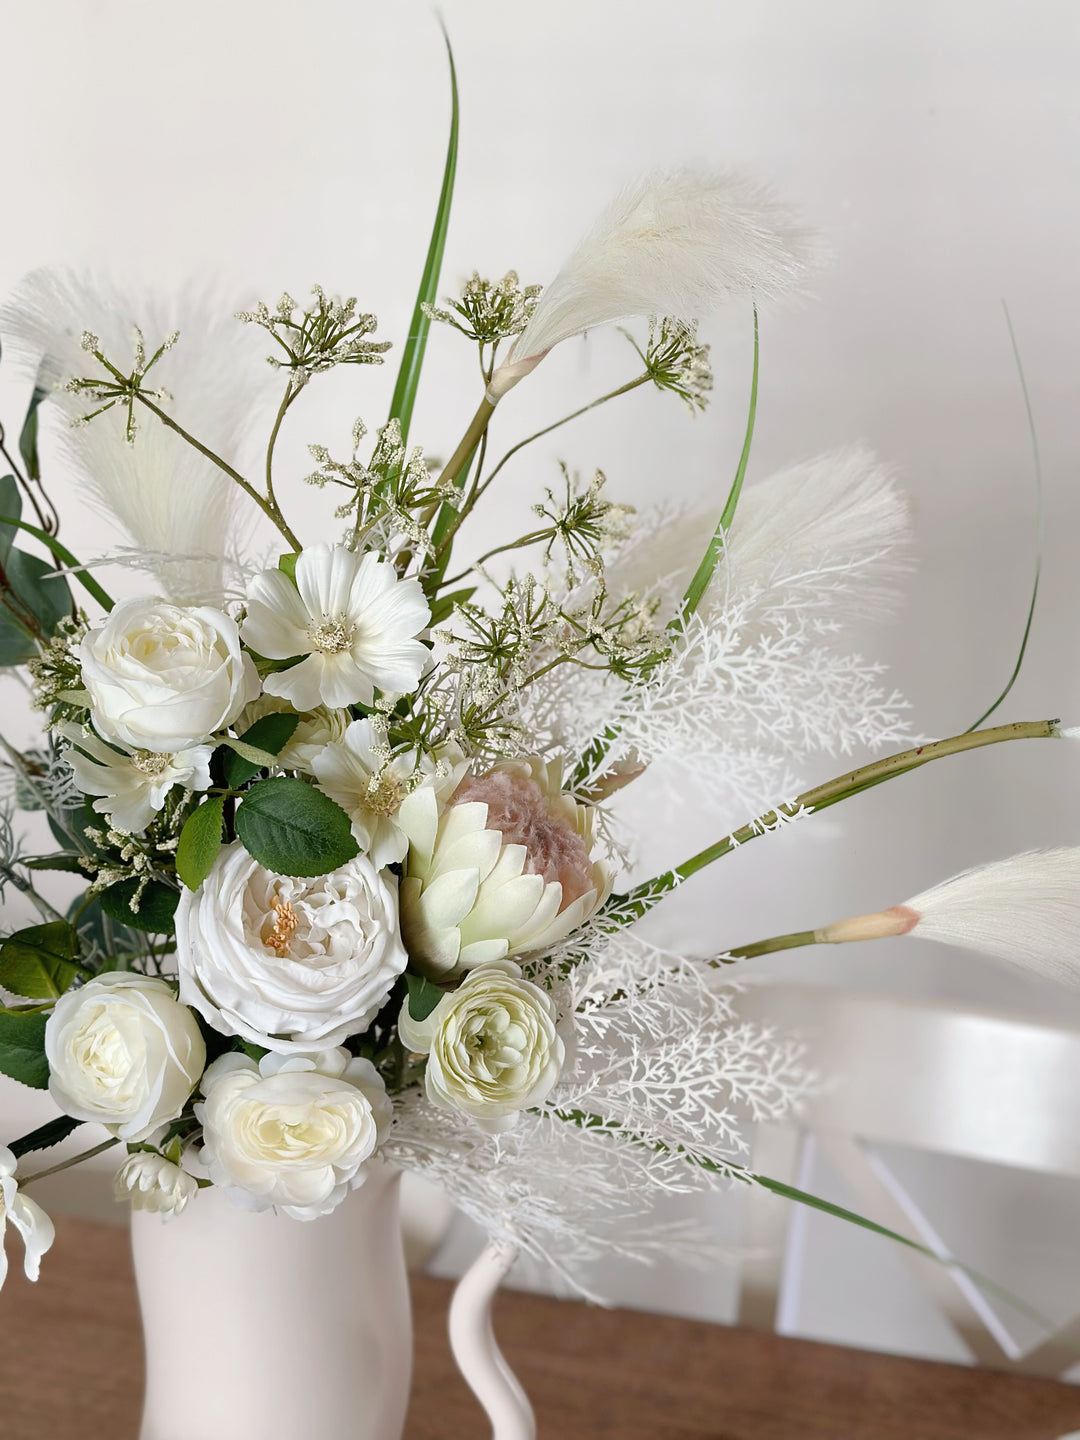 Refreshing Green And White Bouquet